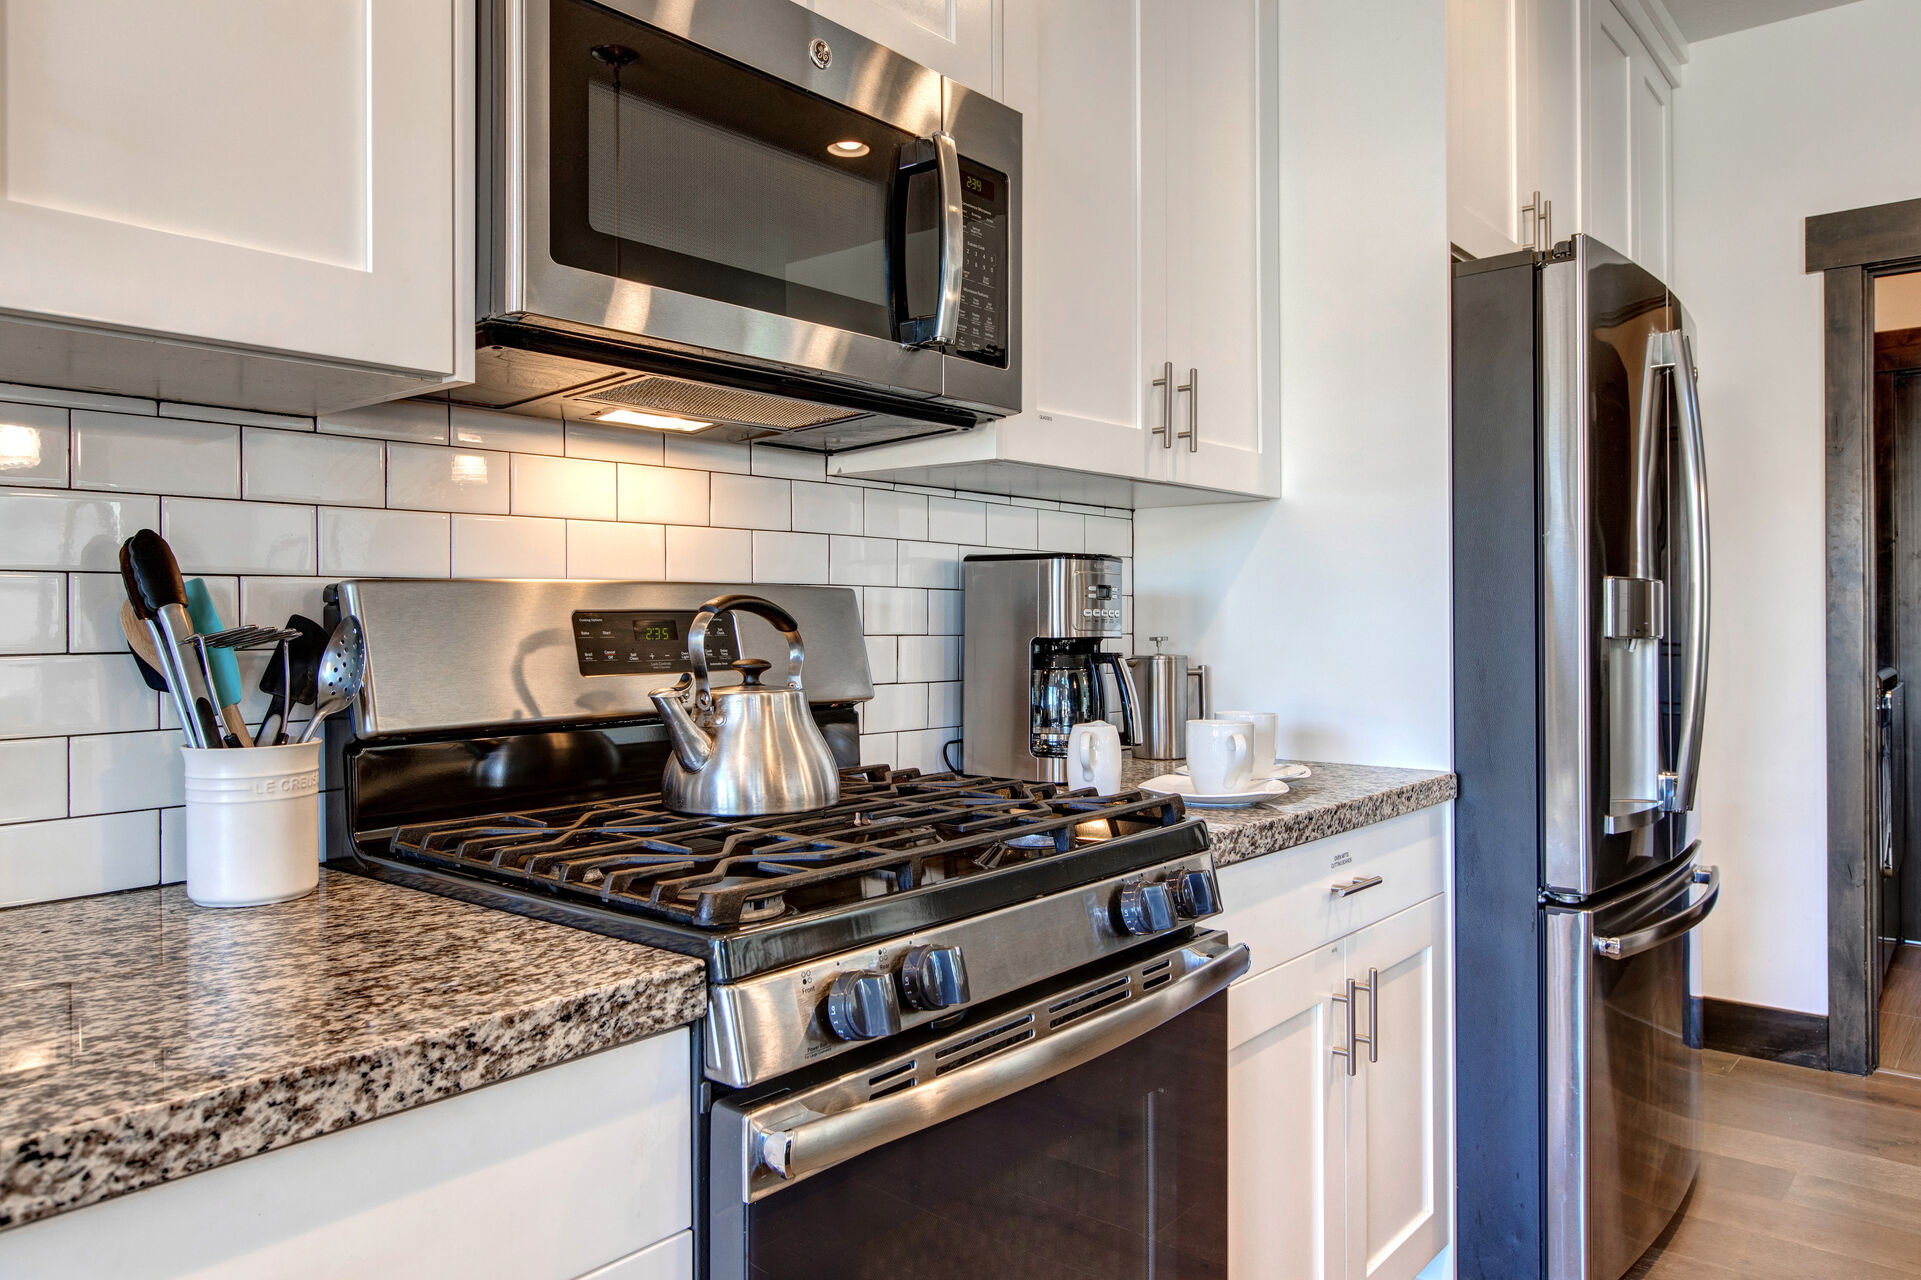 Fully Equipped Kitchen with gorgeous stone countertops, stainless steel appliances, ice maker, ample counter space, and oversized island with bar seating for four